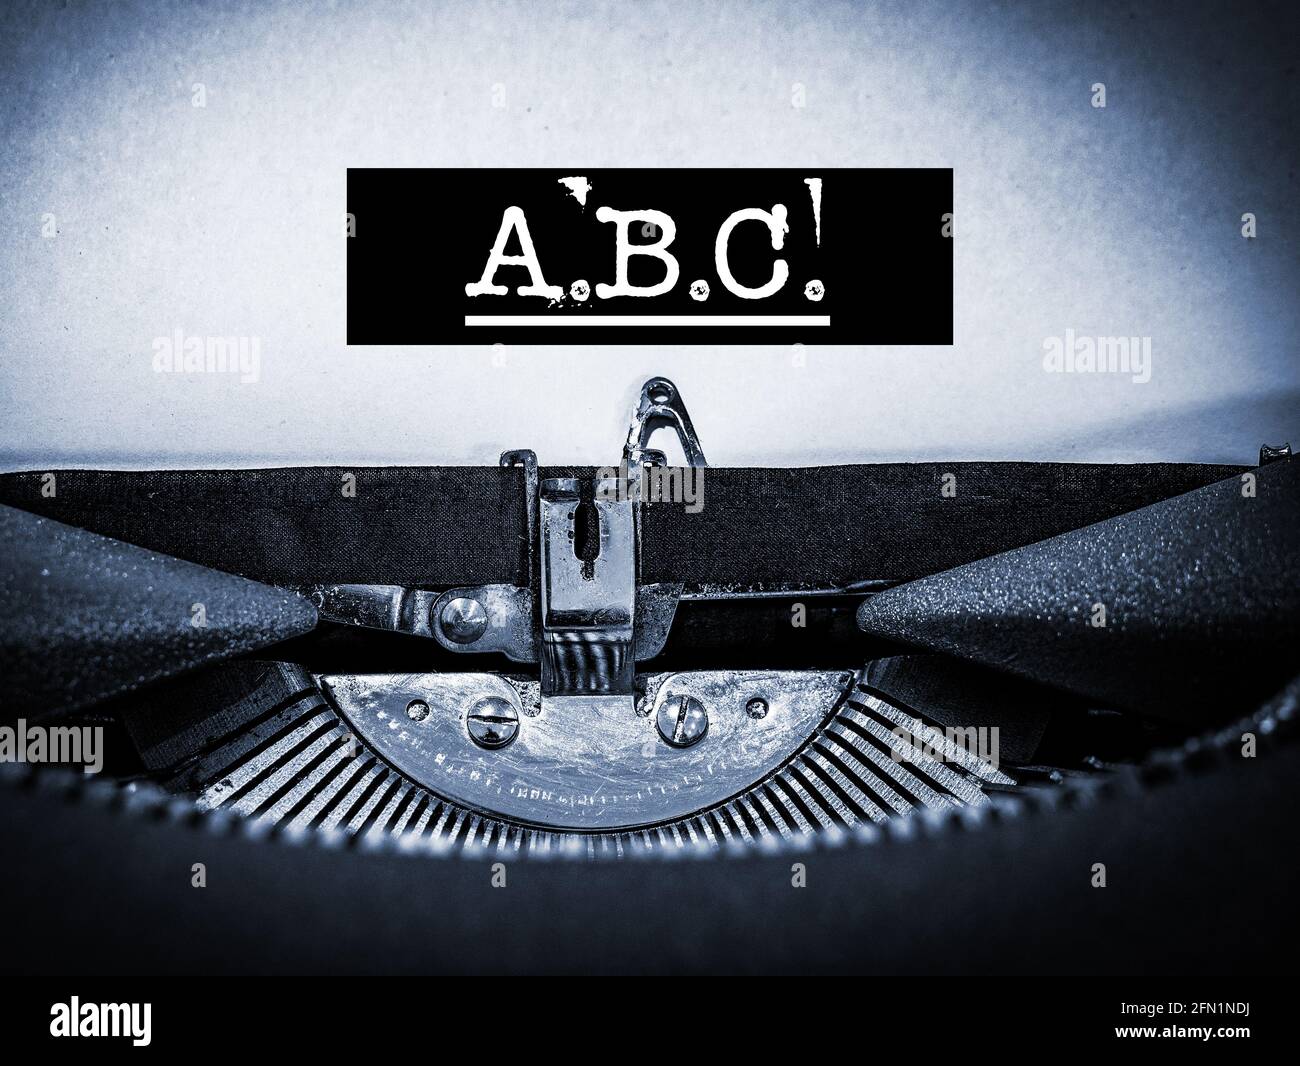 A.B.C written on a typewriter underline text with a black border Stock Photo